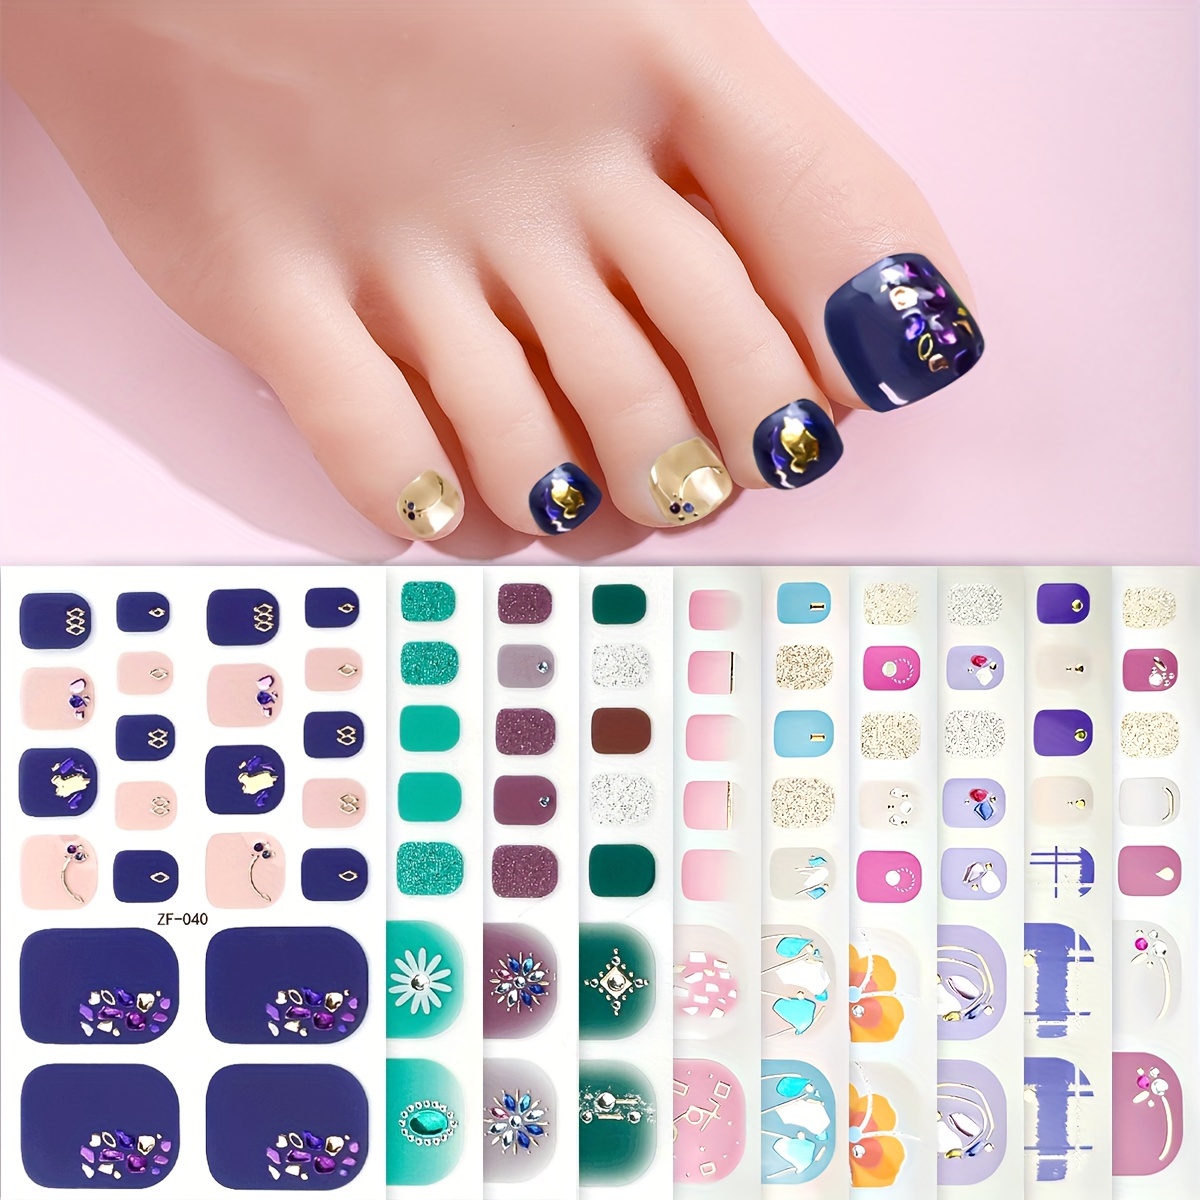 

10 Sheets 3d Toenail Strips, Spring Summer Y2k Shining Luxury Faux Gemstone Nail Wraps, Self-adhesive Nail Stickers Decoration With 2 Nail Files Suitable For Women For Quick Manicure